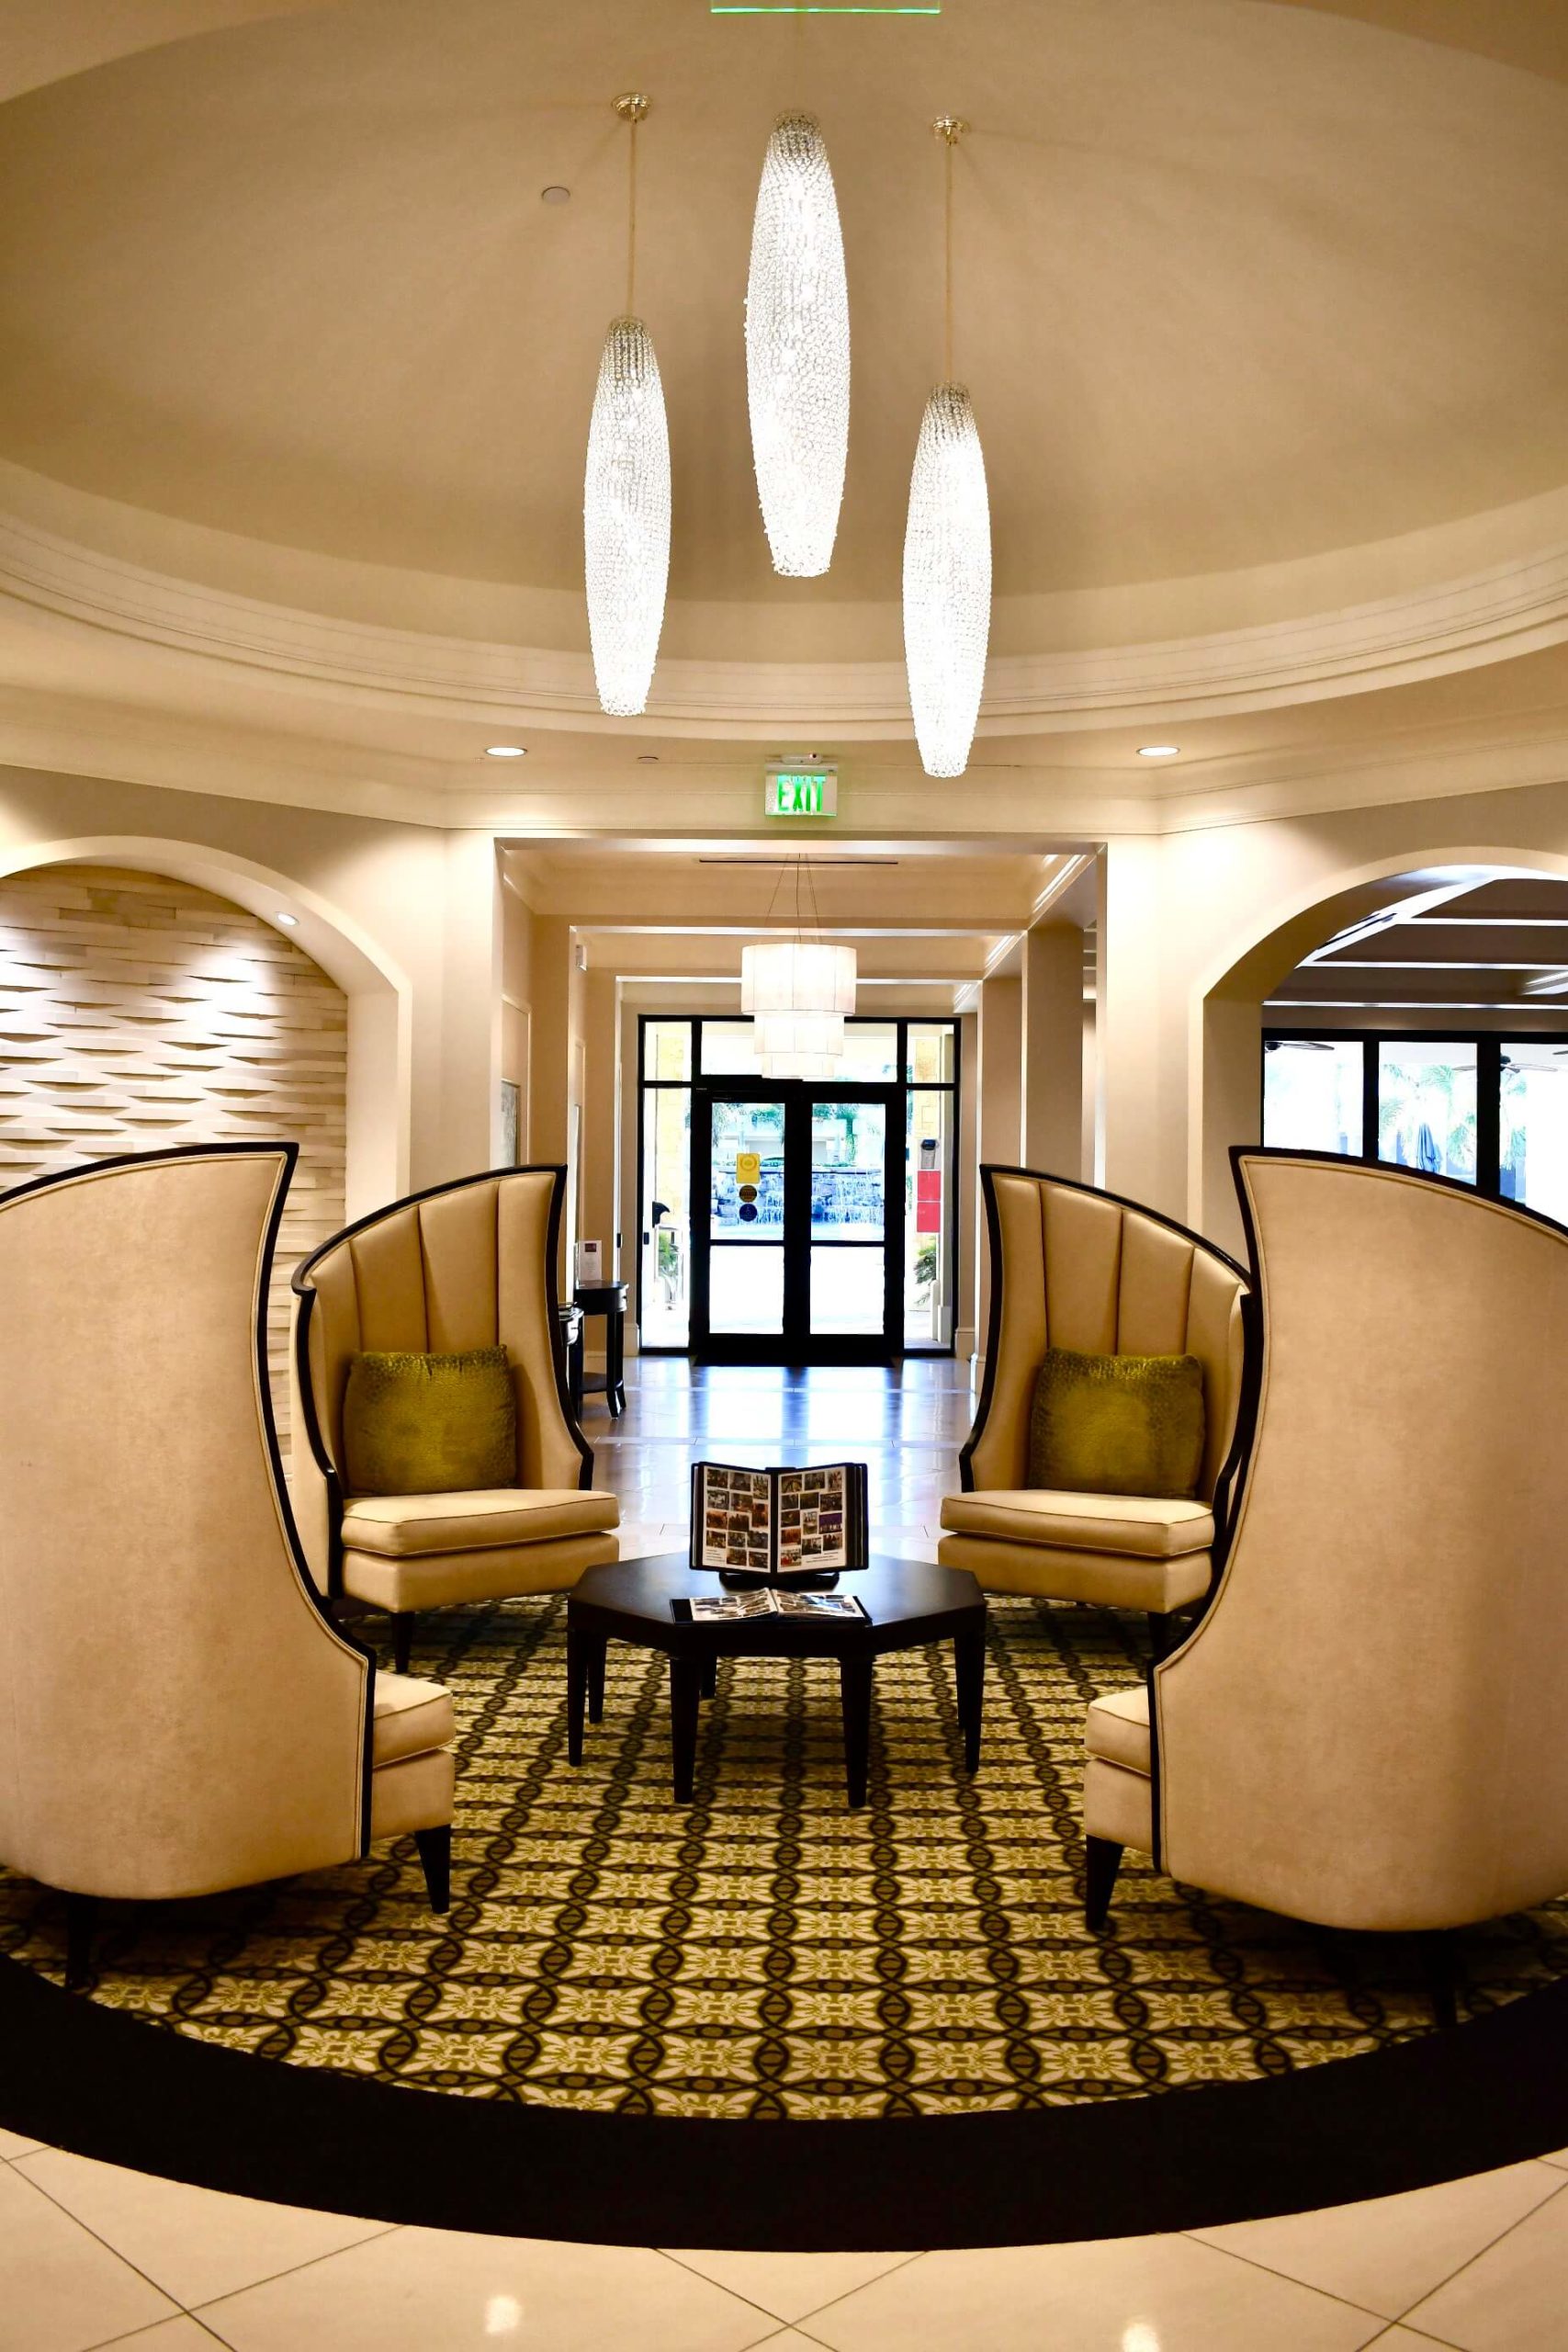 Upon entering the clubhouse, you are greeted with a beautiful sitting area